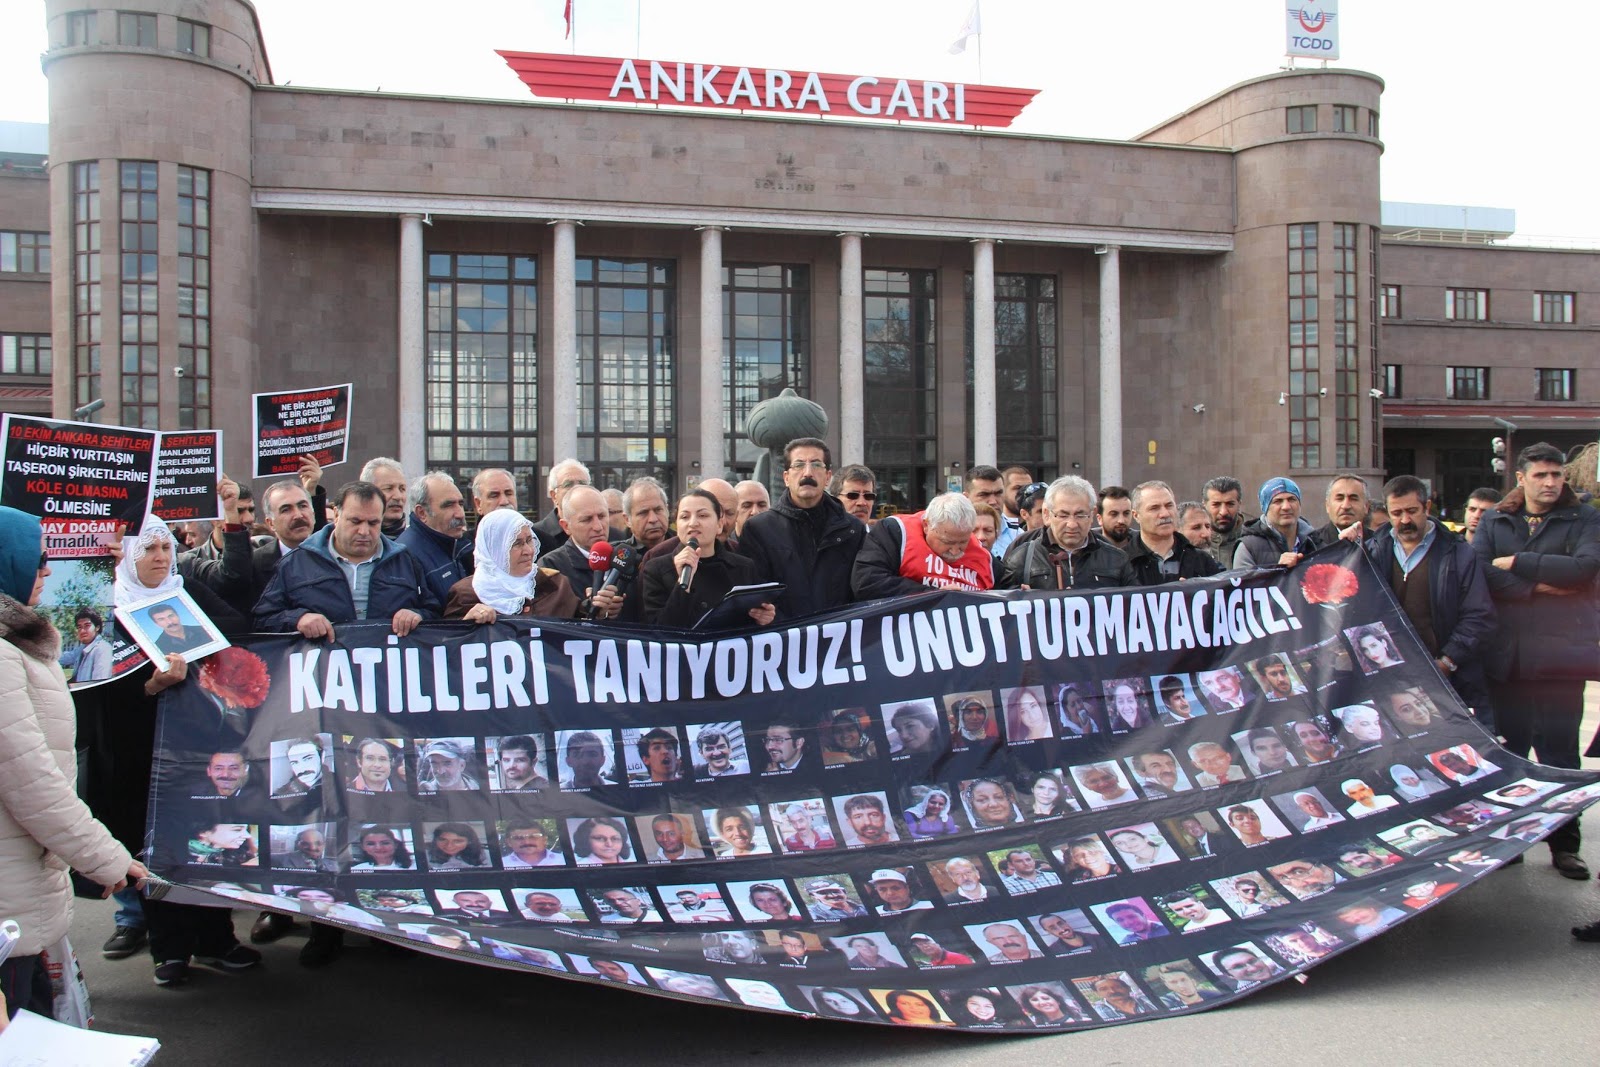 Turkish Twitter users commemorate Ankara train station bombing victims and demand justice 1